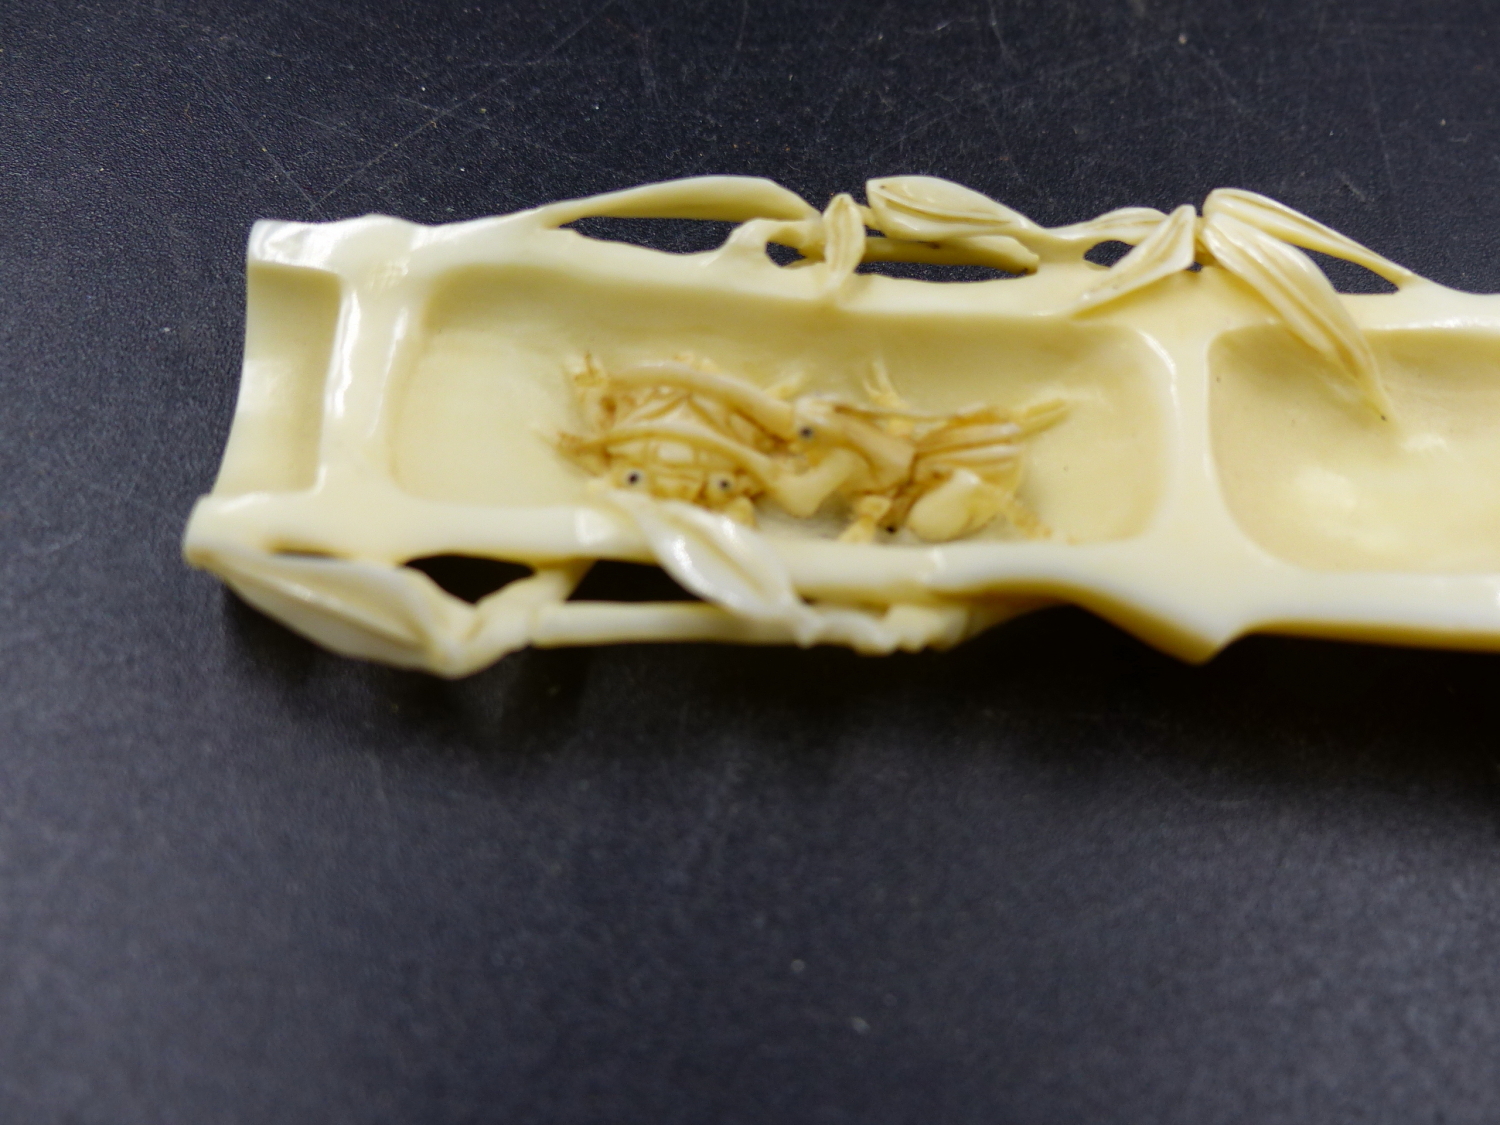 A JAPANESE MARINE IVORY OKIMONO CARVED AS A SPLIT SECTION OF BAMBOO CONTAINING A CONFRONTATION OF - Image 4 of 6